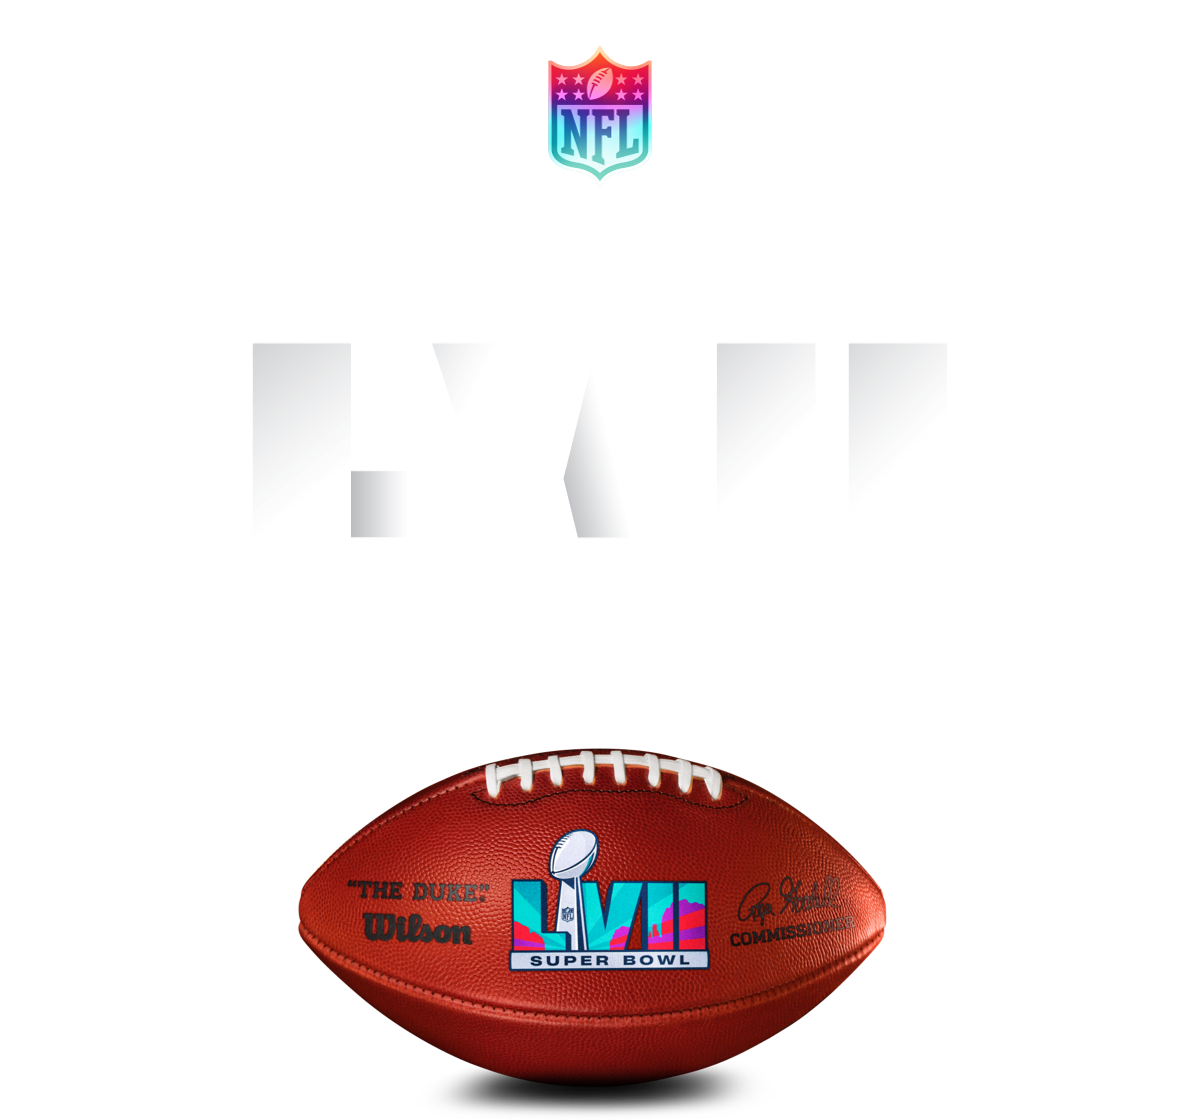 Here's how to stream Super Bowl LVII 2023